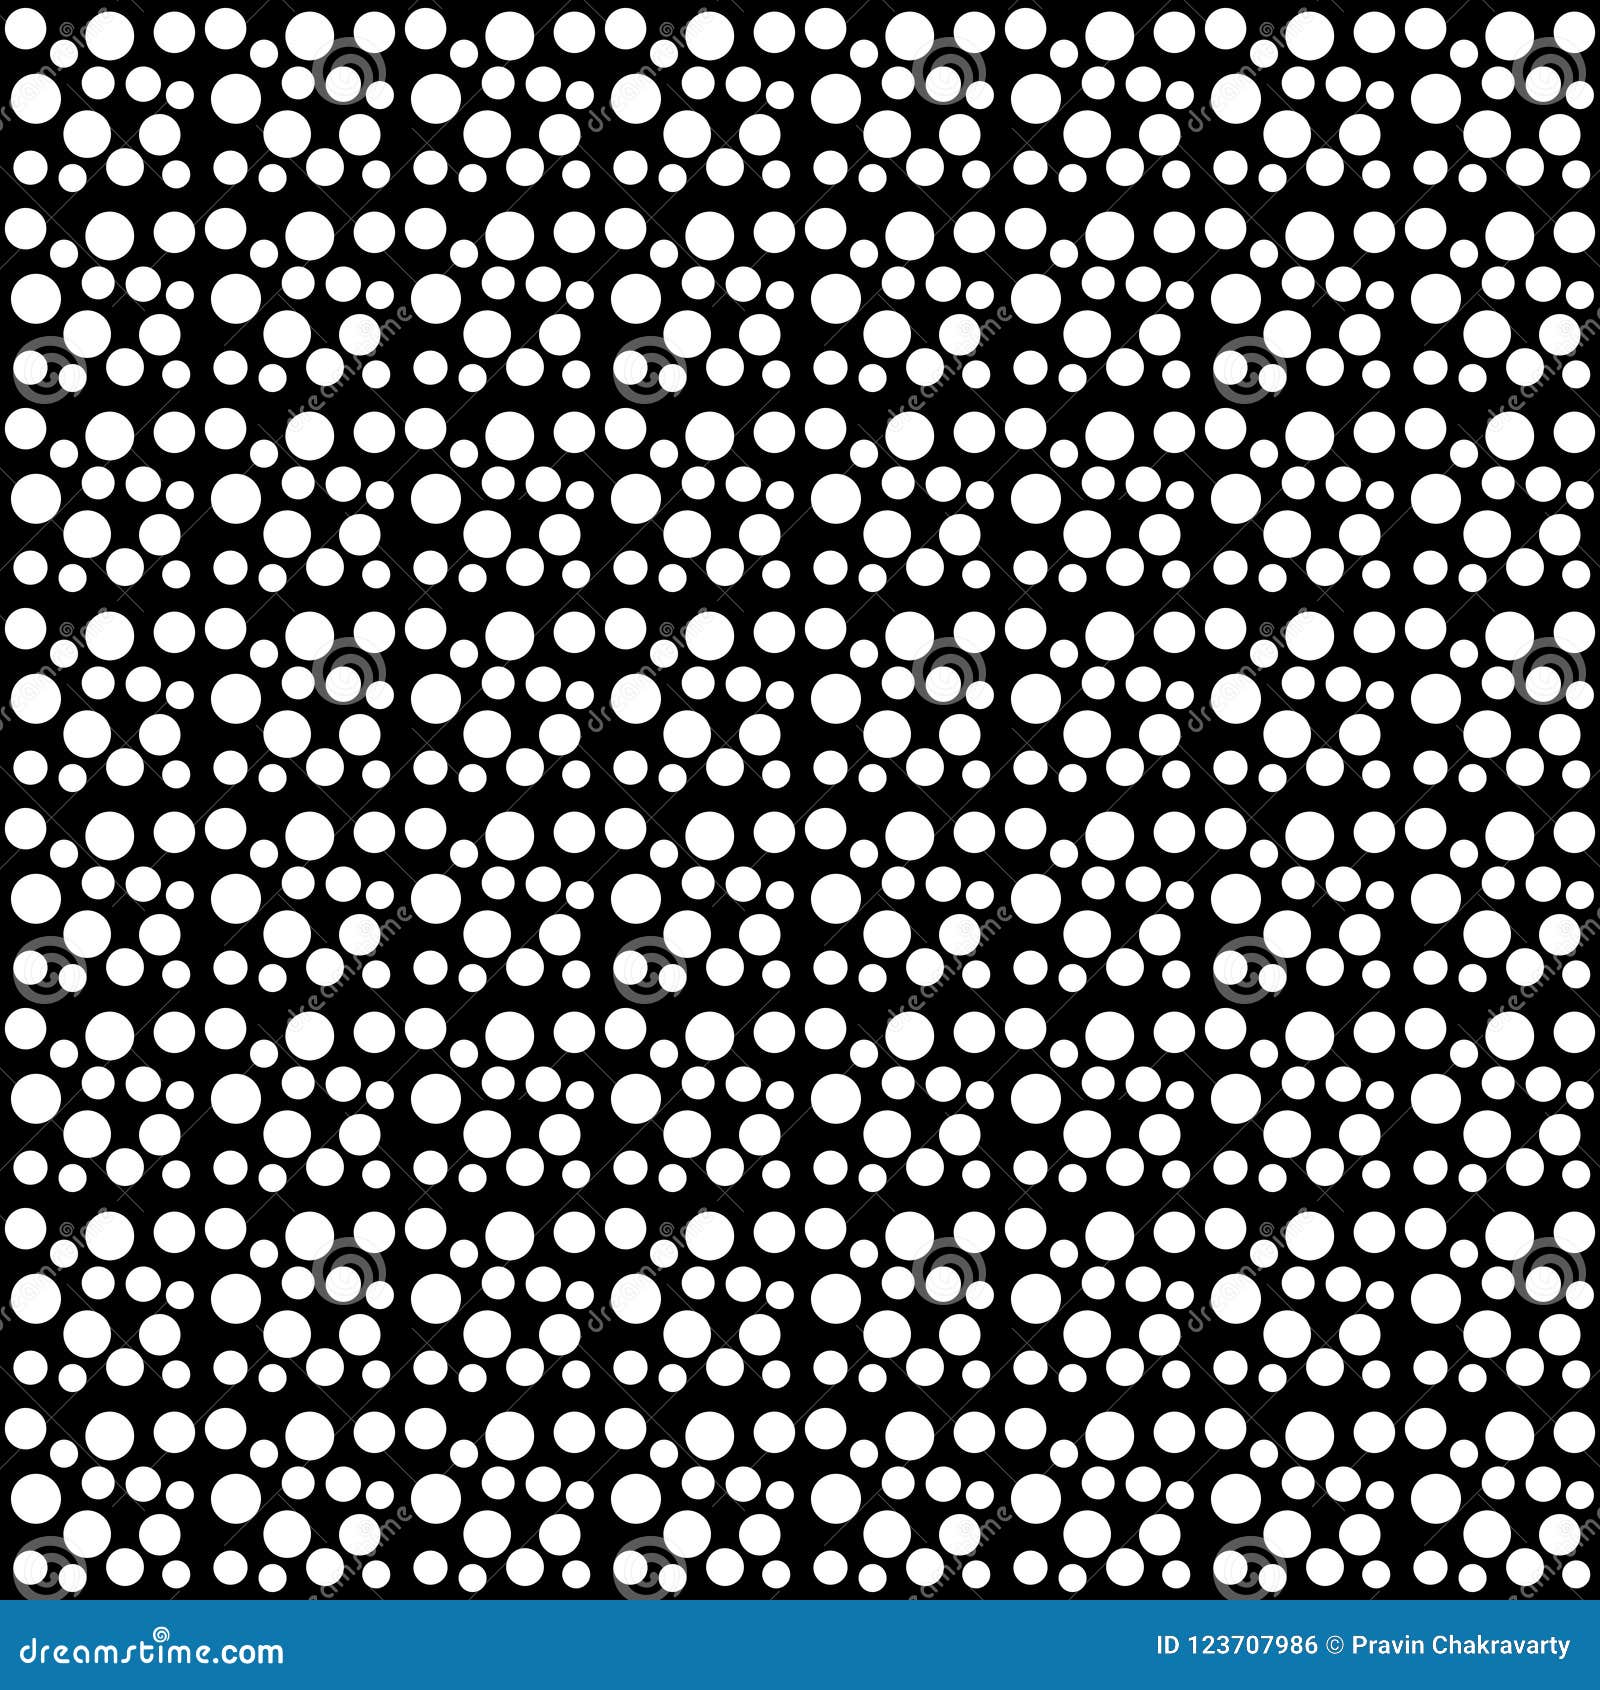 Vector Seamless Polka Dots Abstract Pattern Black And White